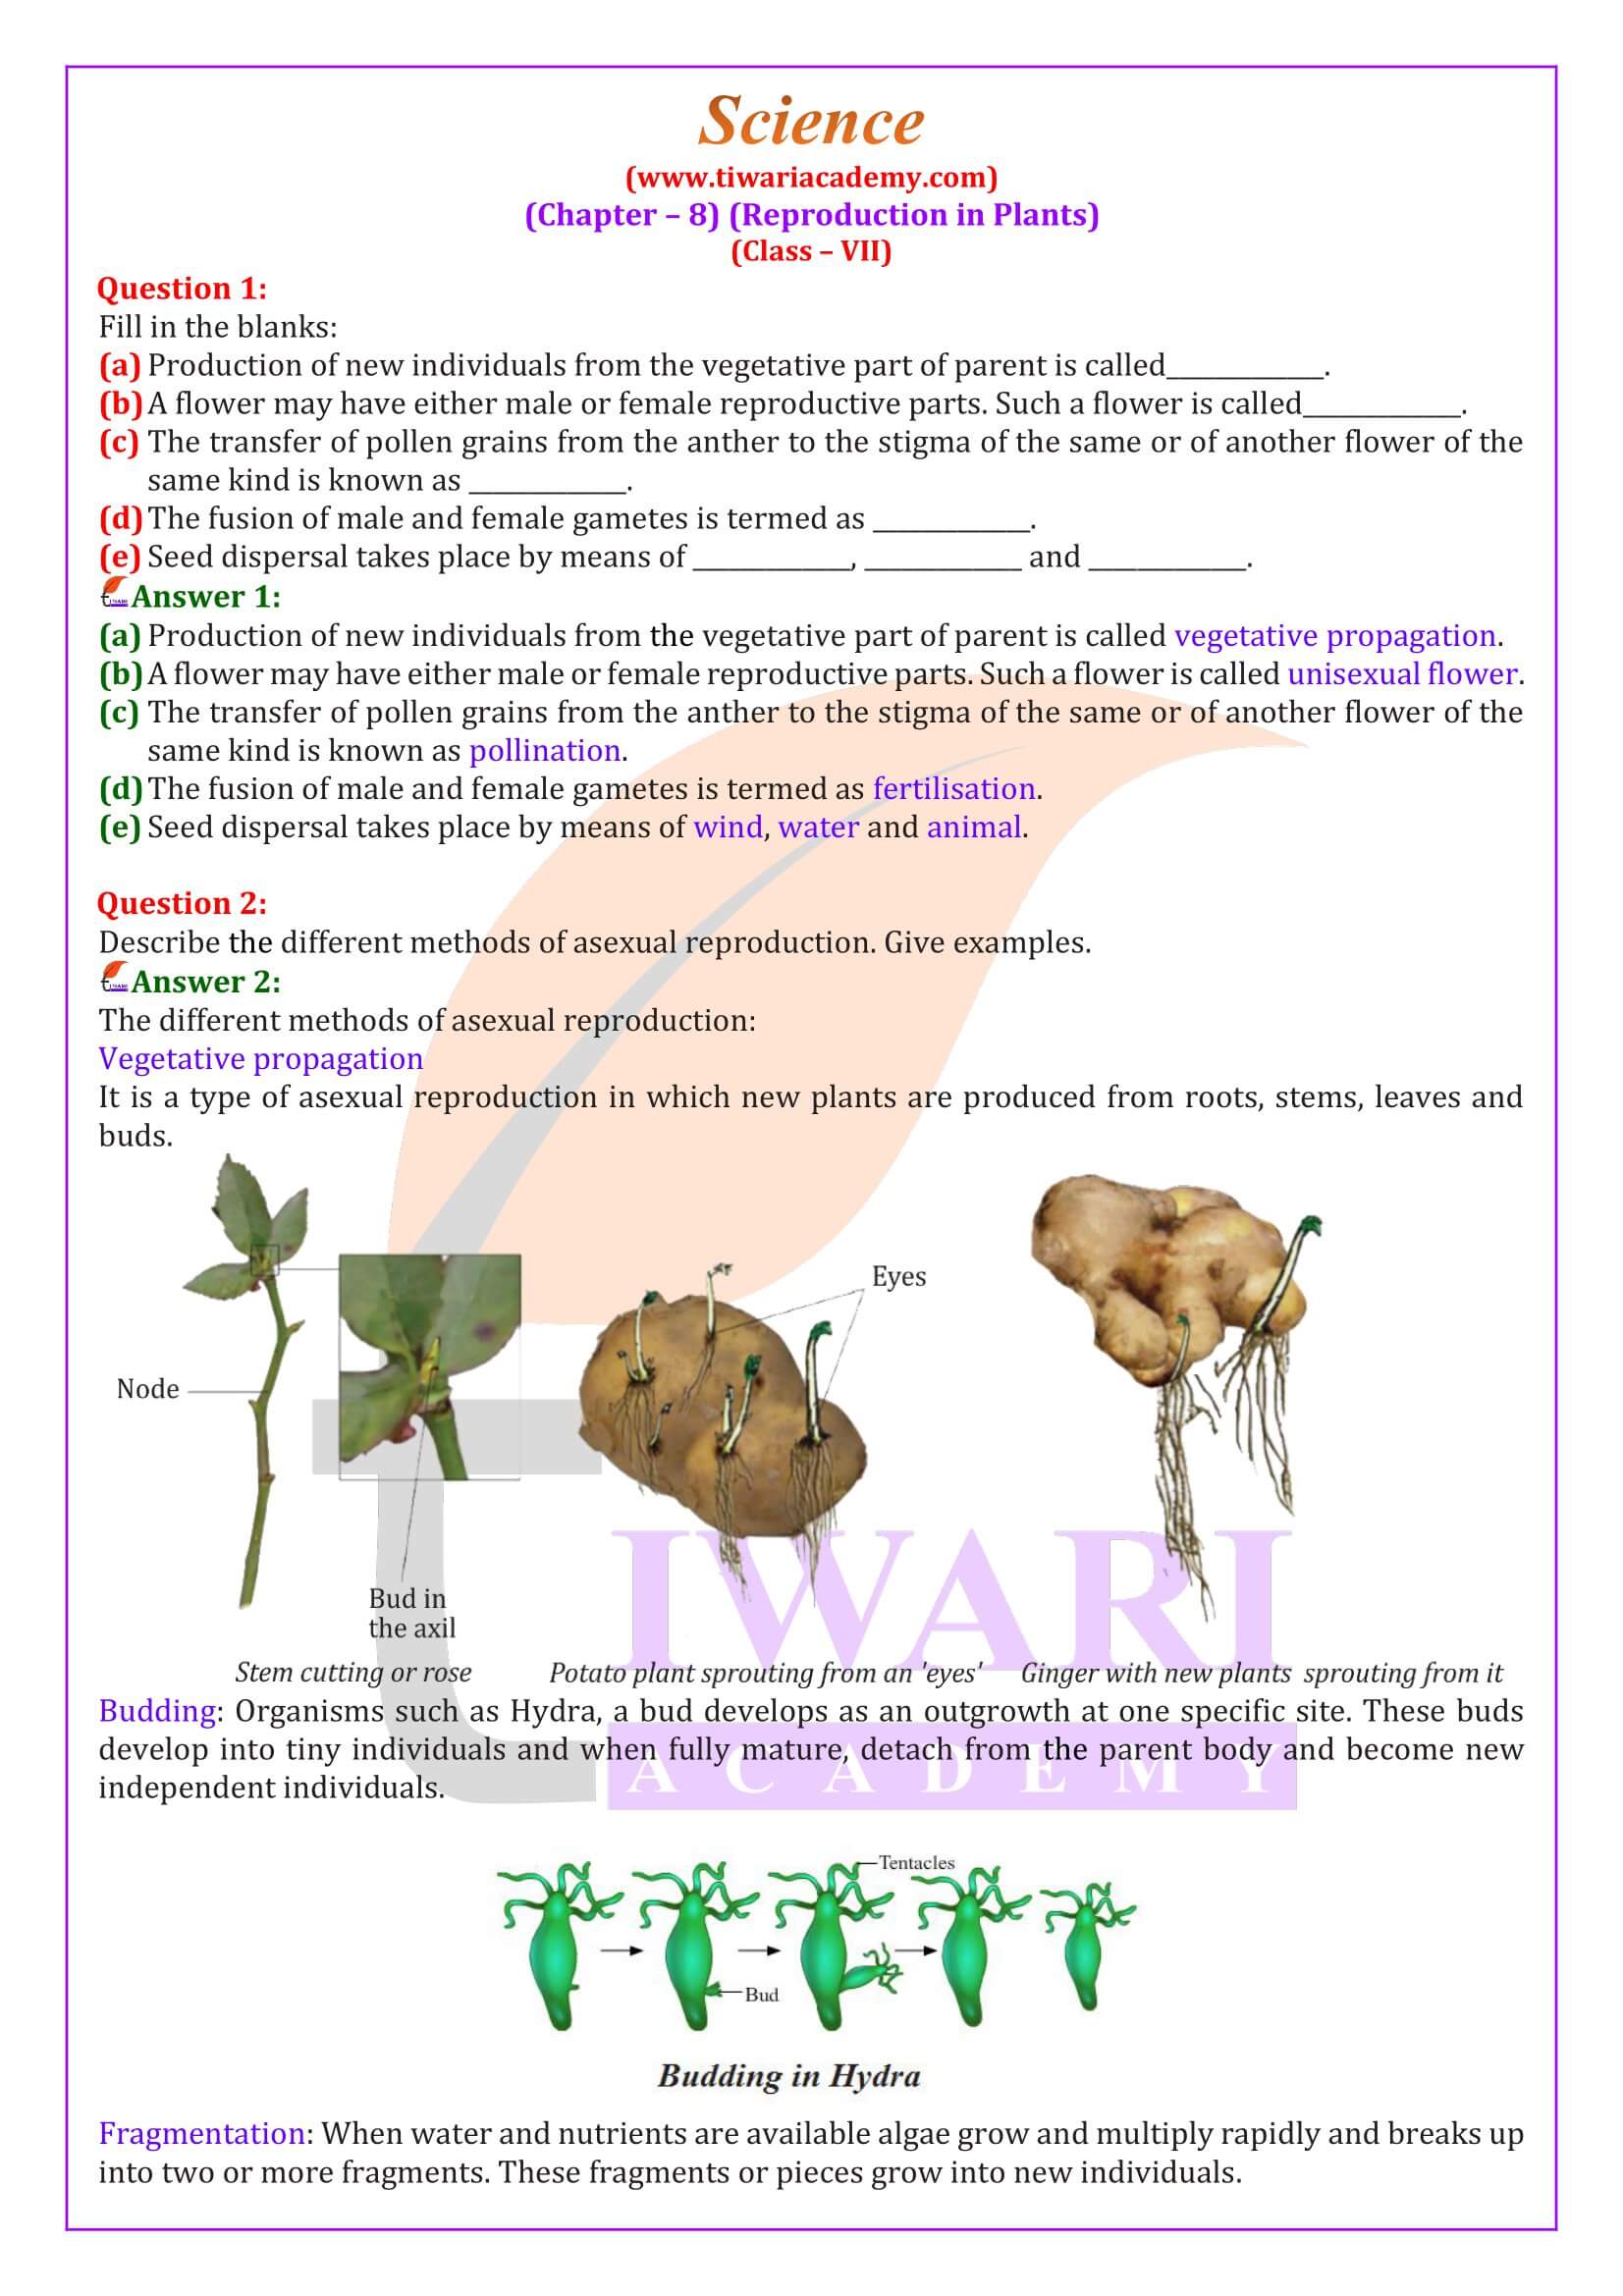 NCERT Solutions for Class 7 Science Chapter 8 in English Medium